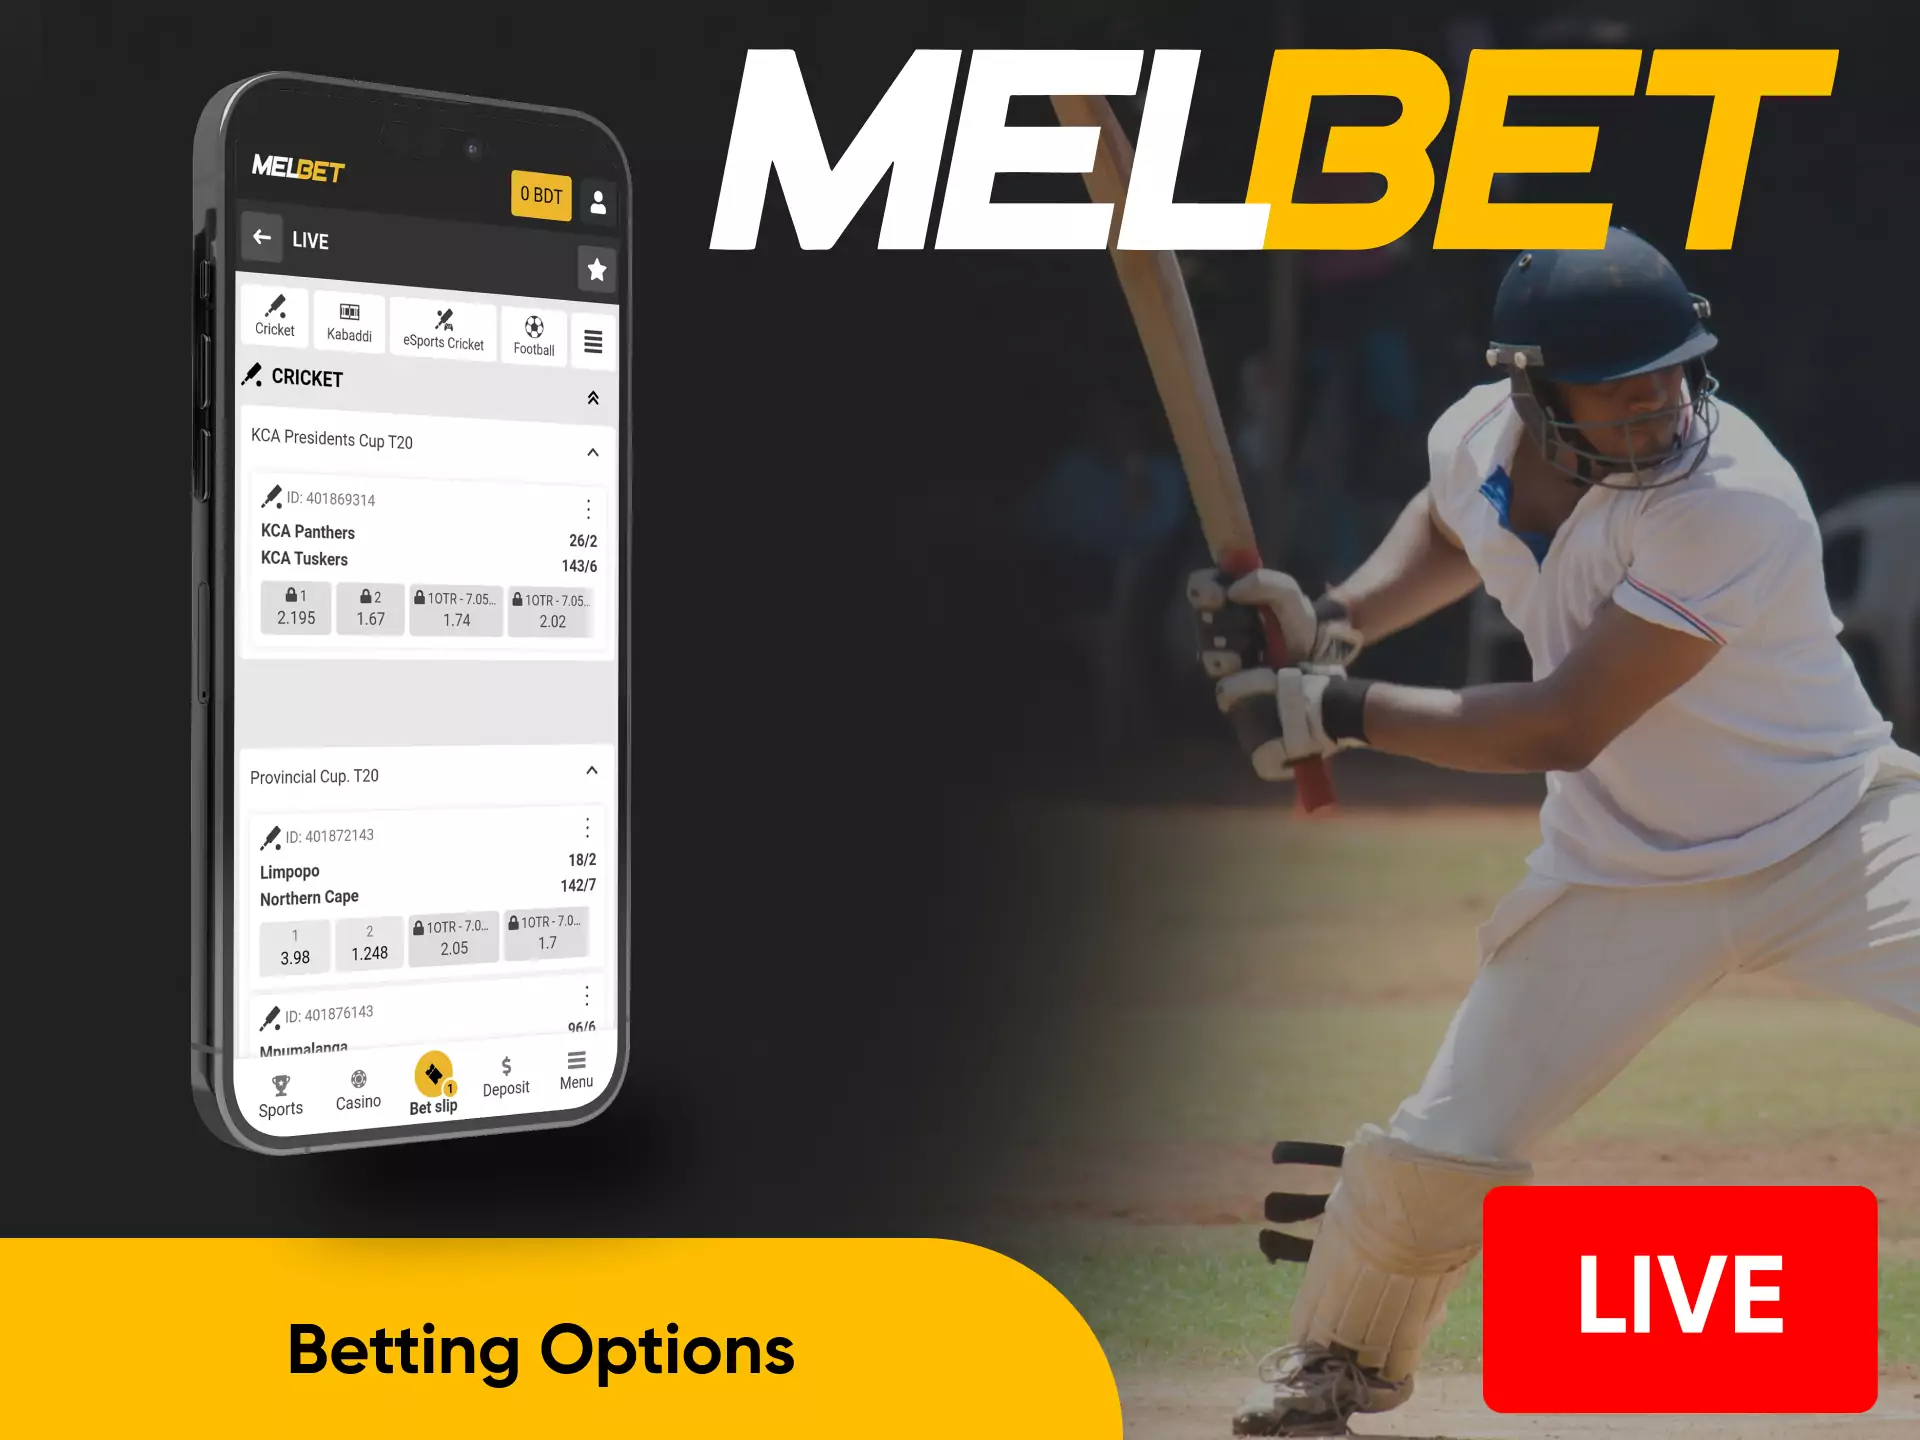 In the Melbet app, you find a lot of betting options.